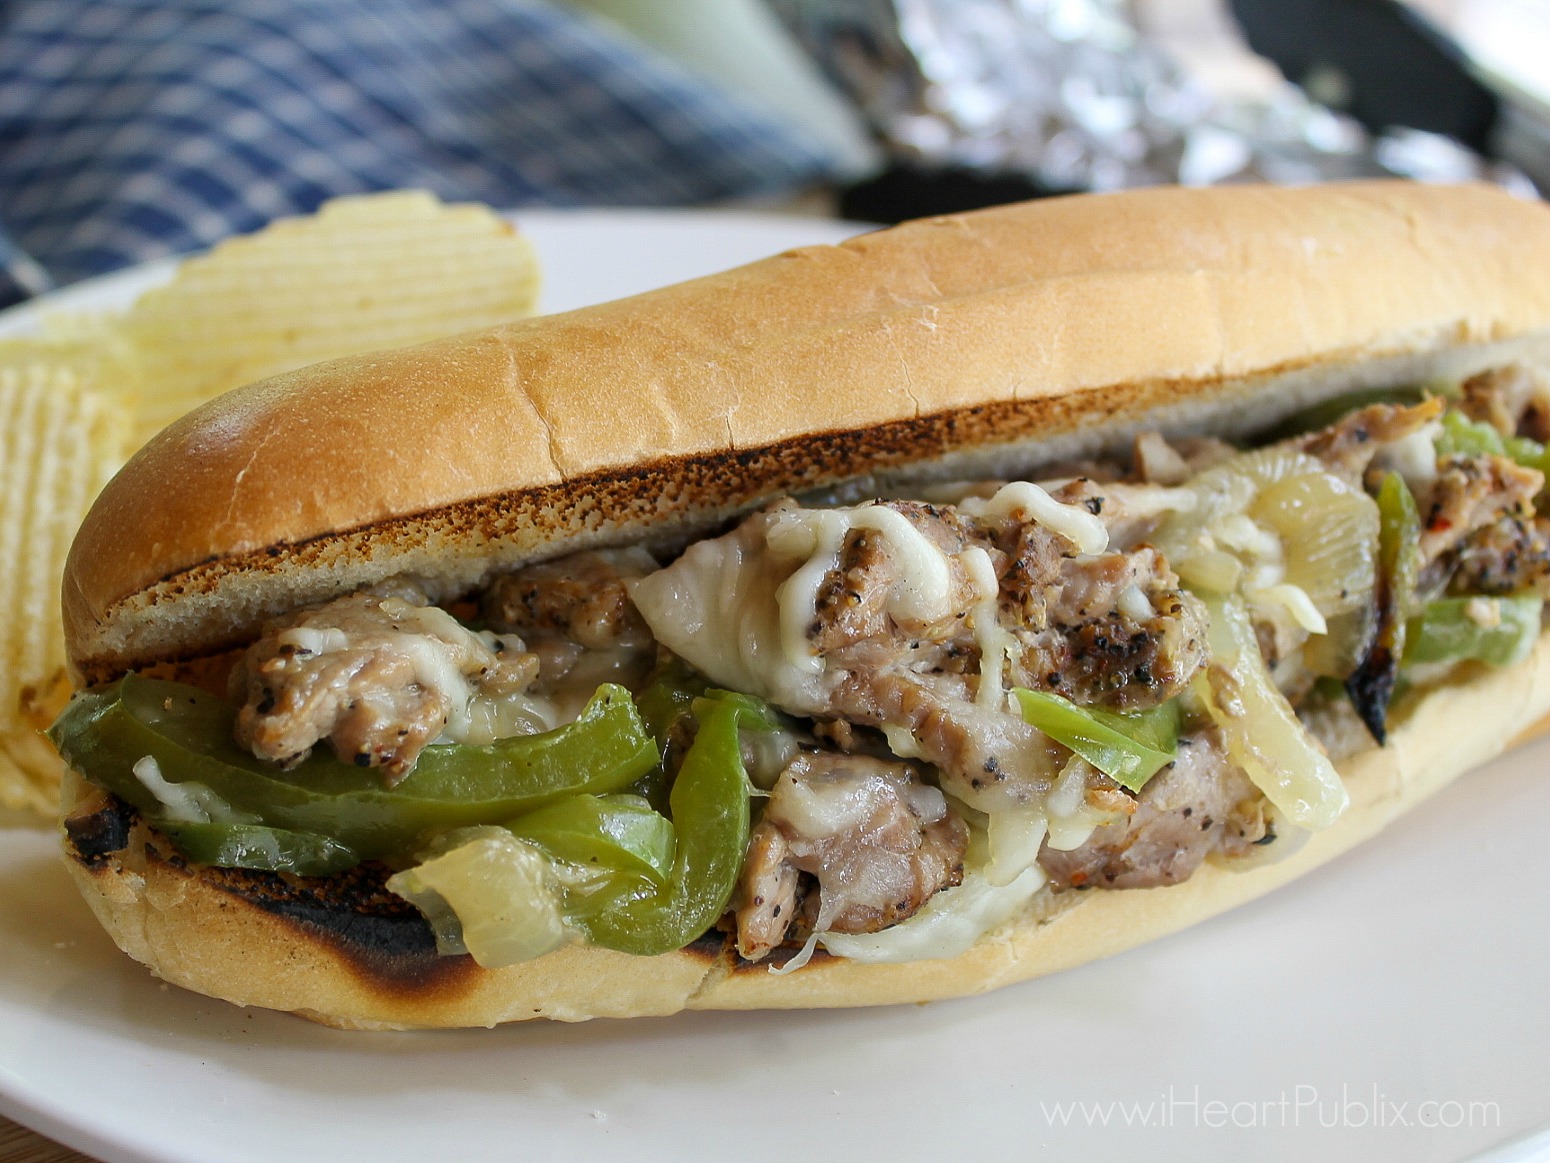 Grilled Foil Packet Pork Cheesesteak Sandwiches + Enter The Smithfield Sweepstakes For Your Chance To Win $5000